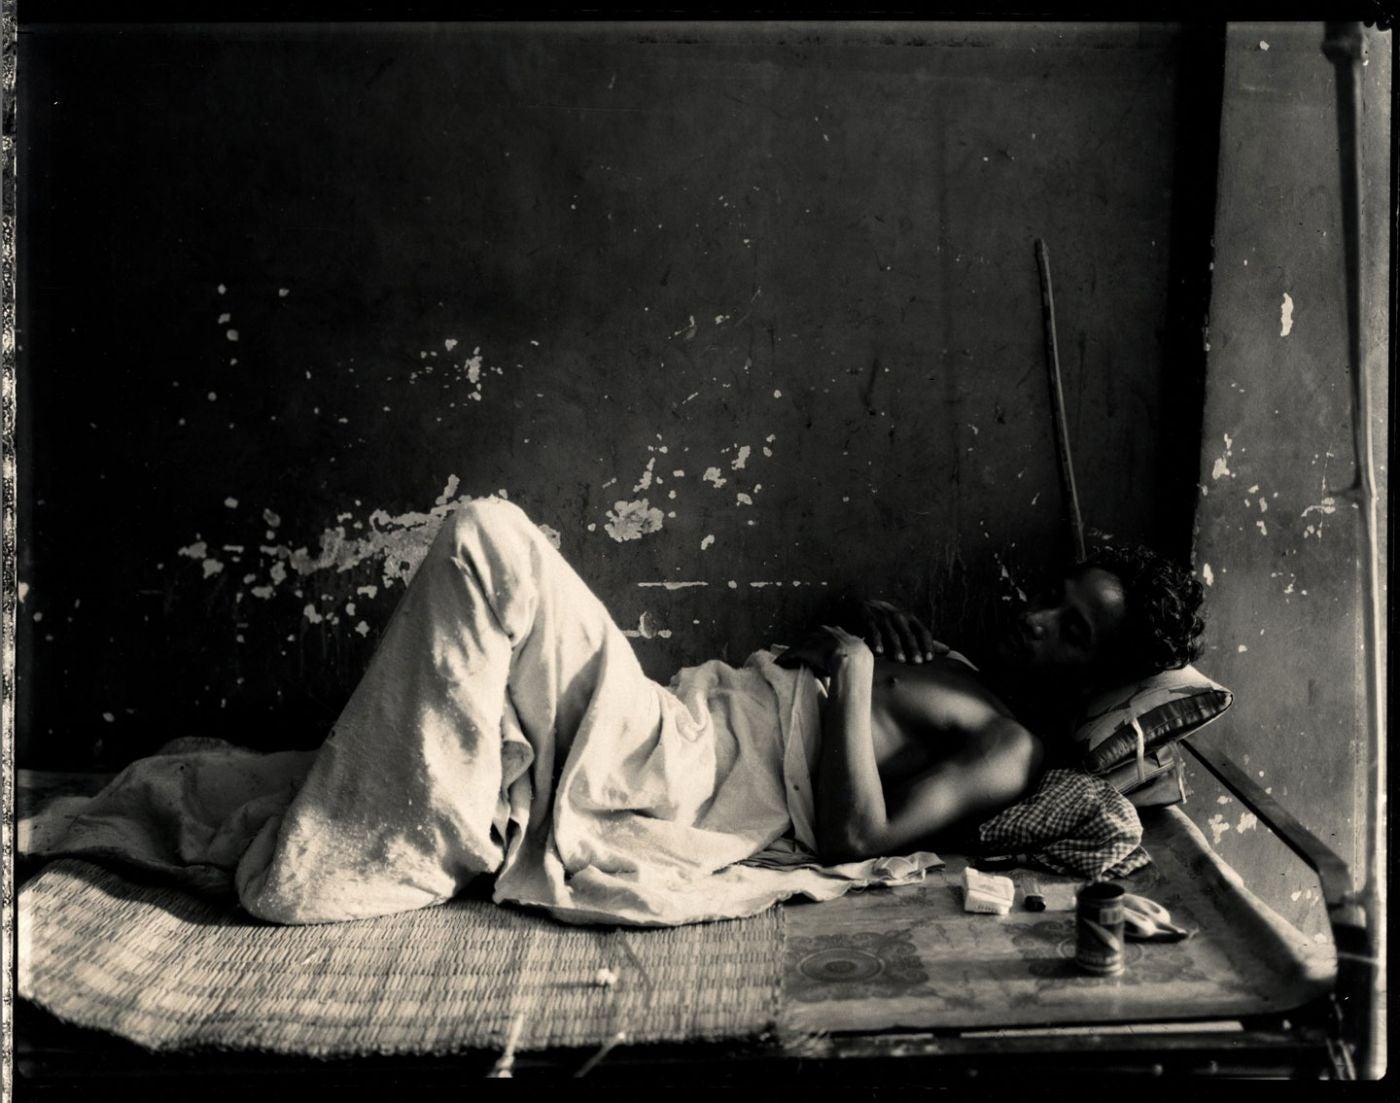 Bill Burke: "Military Hospital, Phnom Penh, 1995," Limited Edition Toned Gelatin Silver Print (16x20" from an edition of 25)